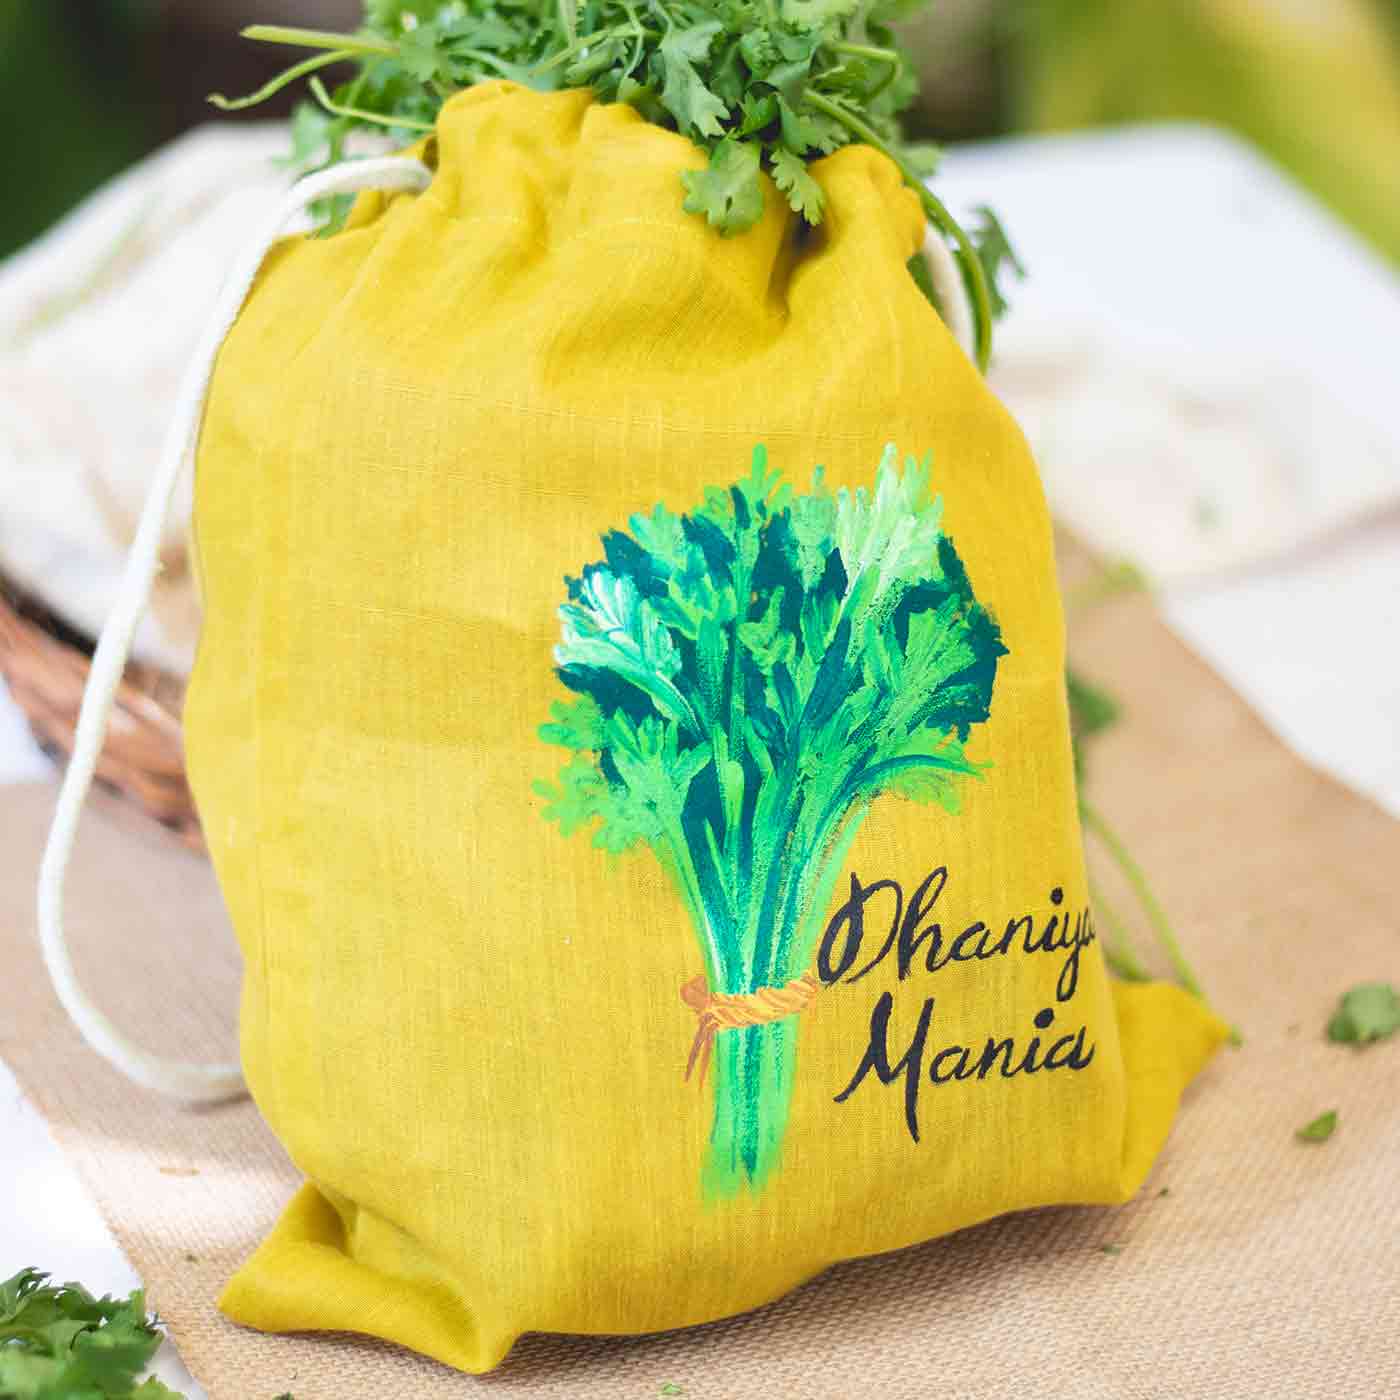 PP Vegetable Packaging Leno Bags Manufacturer, Exporter from India, PP  Vegetable Packaging Leno Bags Latest Price